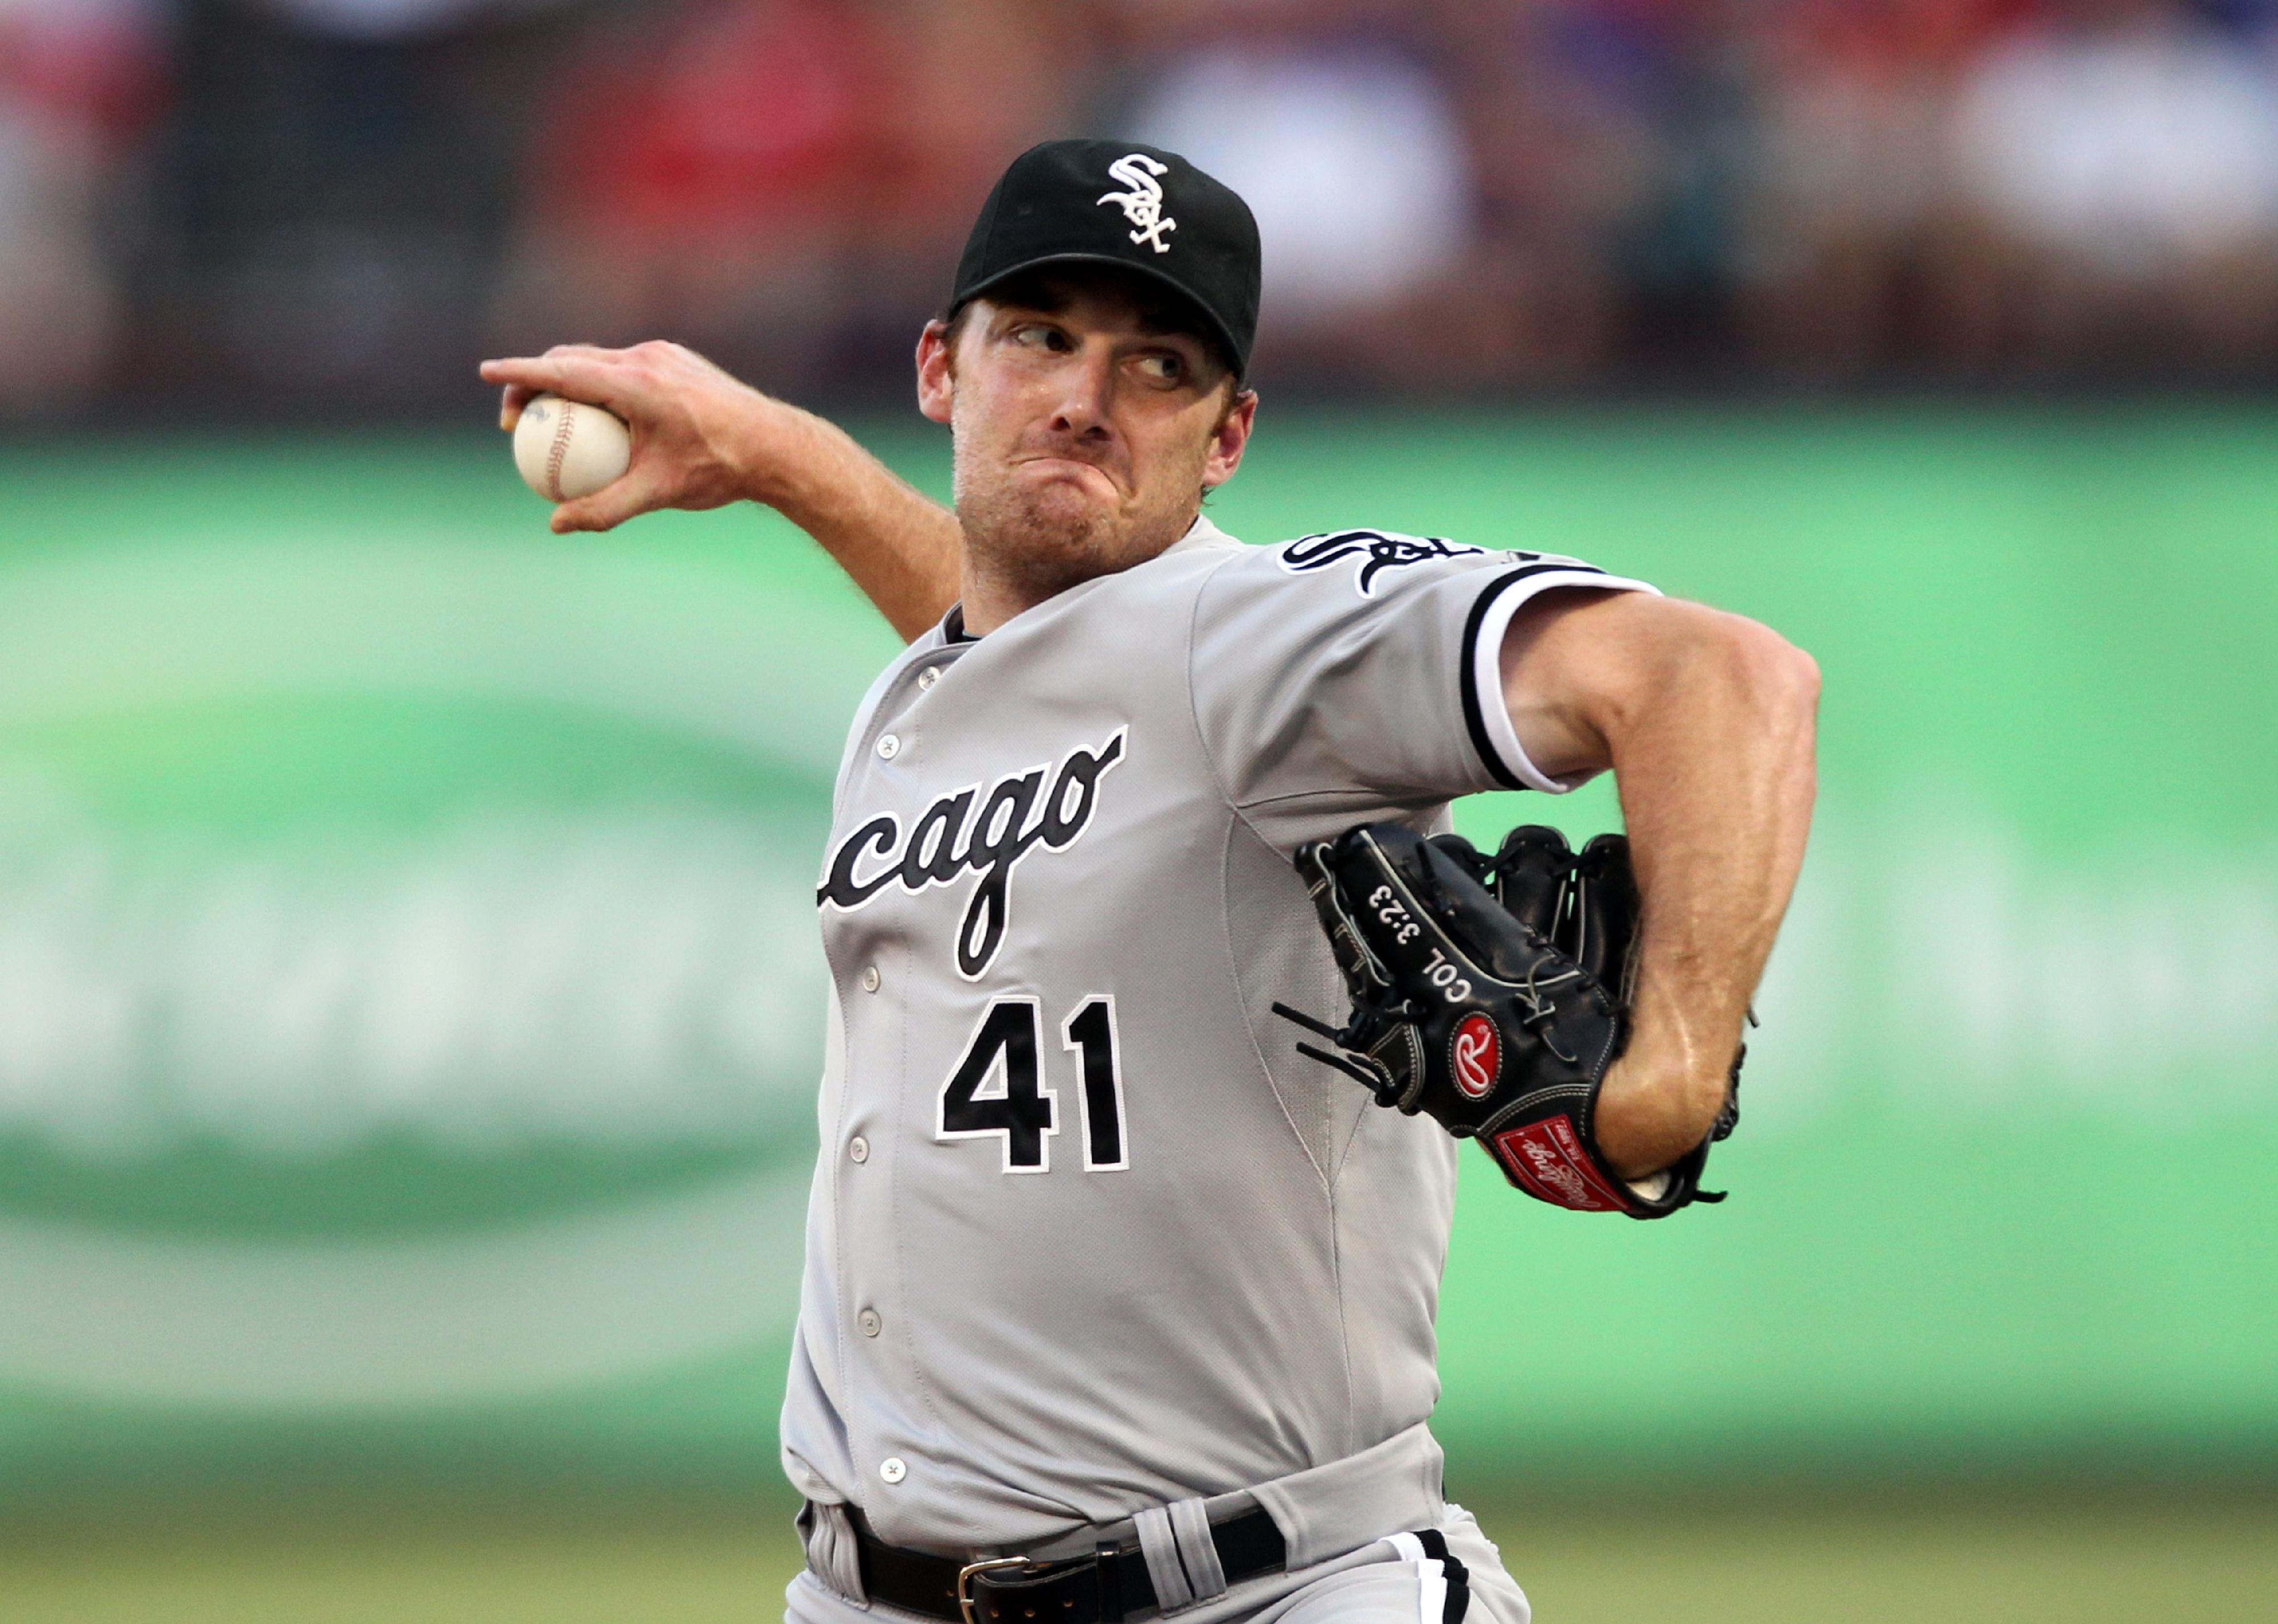 Philip Humber of the Chicago White Sox pitches against the Texas Rangers.